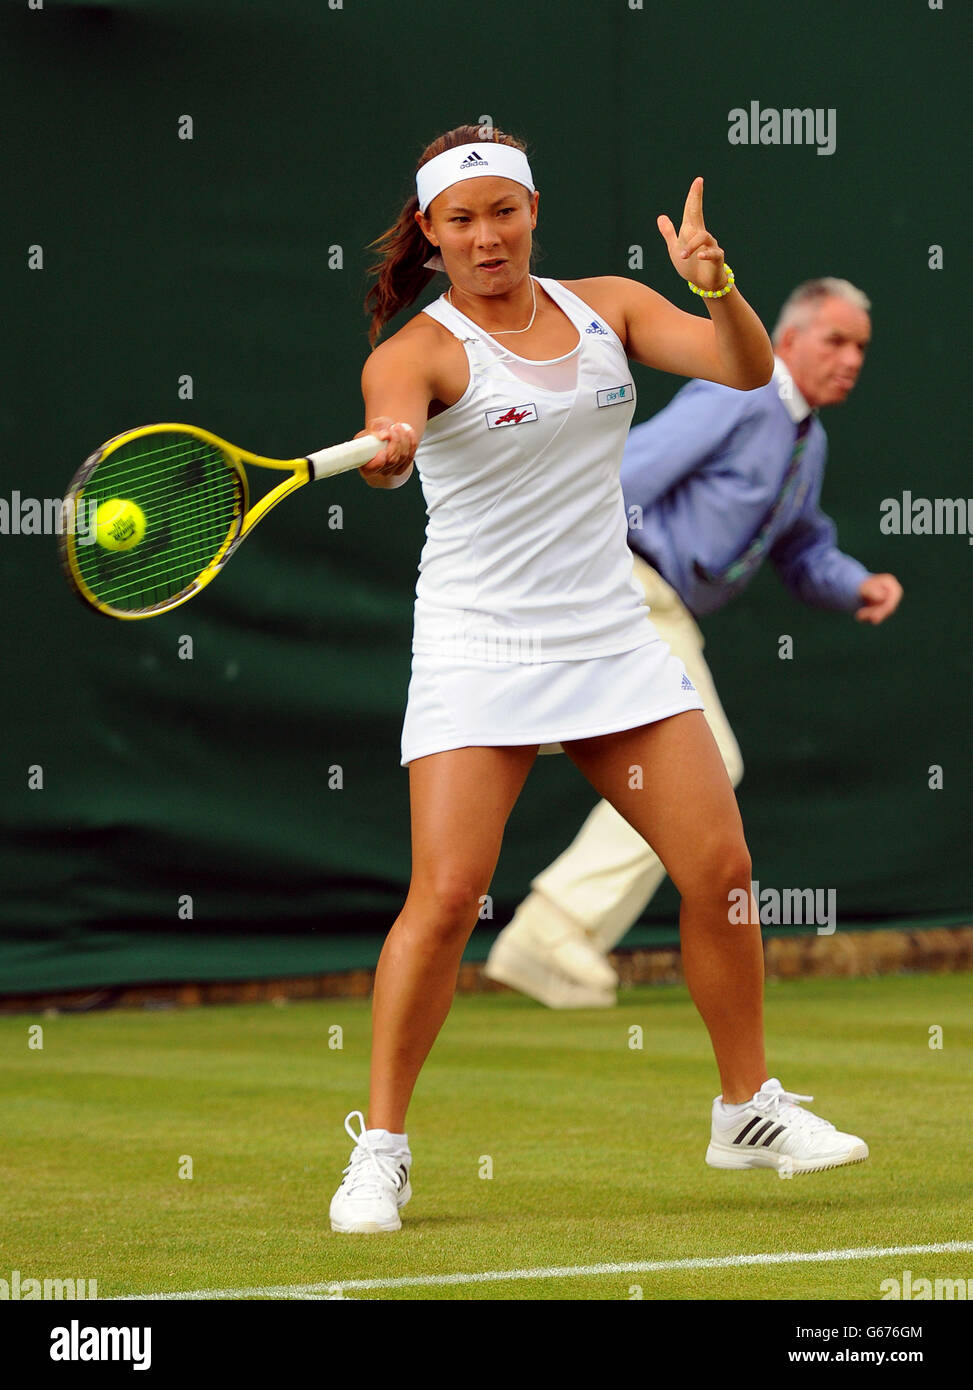 Great Britain's Tara Moore in action against Estonia's Kaia Kanepi during  day Two of the Wimbledon Championships at The All England Lawn Tennis and  Croquet Club, Wimbledon Stock Photo - Alamy